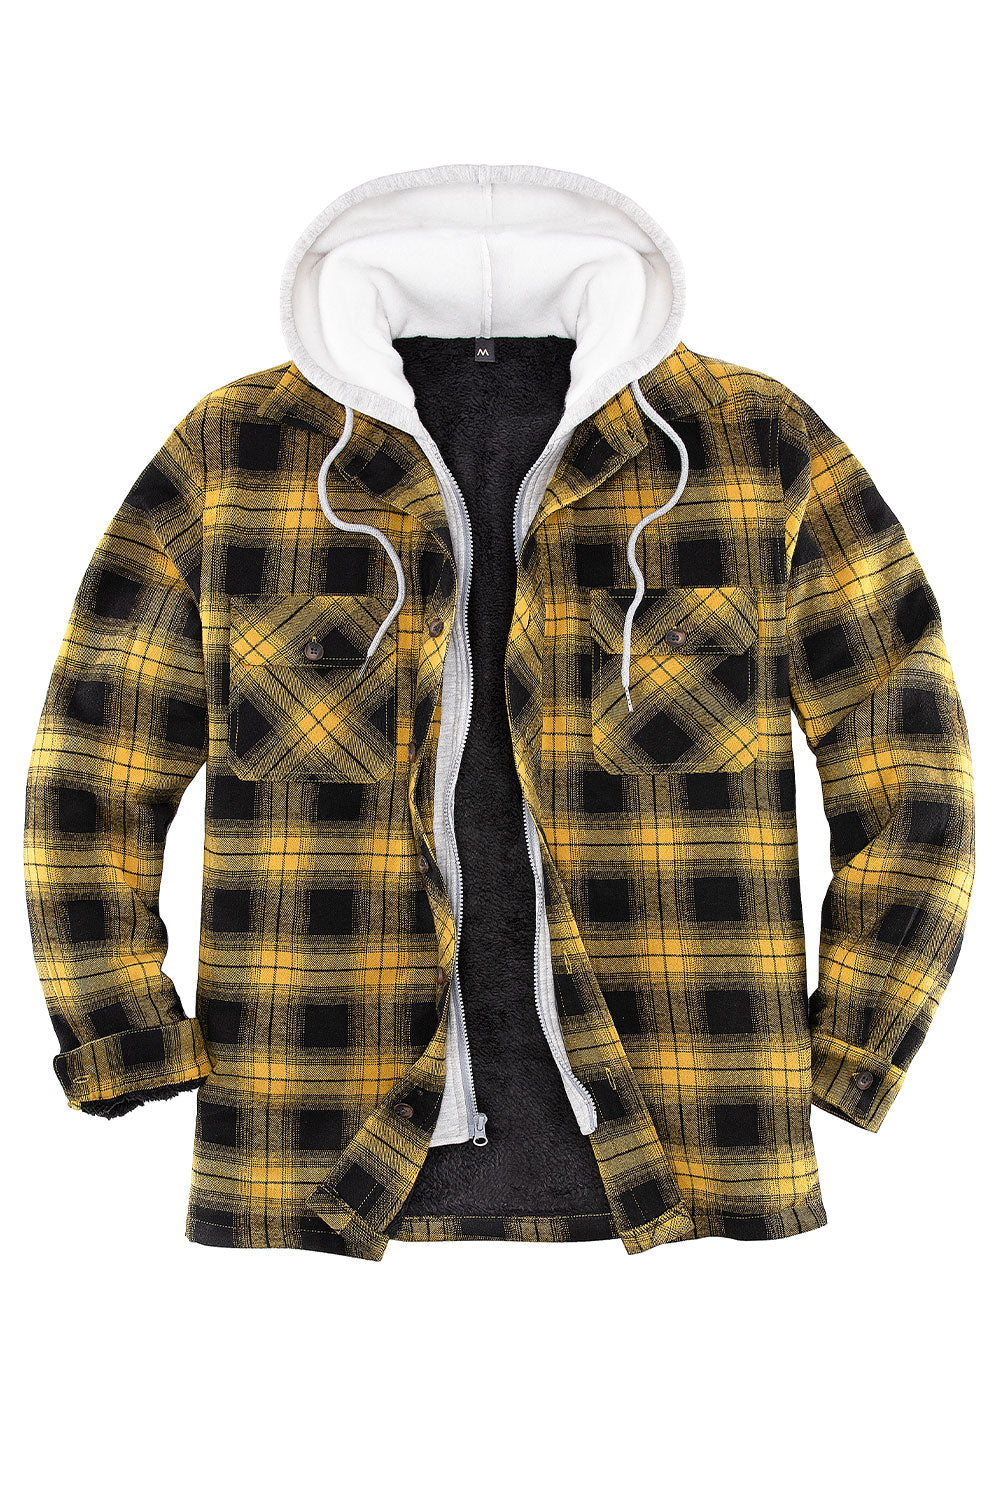 Men's Fuzzy Sherpa Lined Zip Up Plaid Flannel Shirt Jacket with Hood